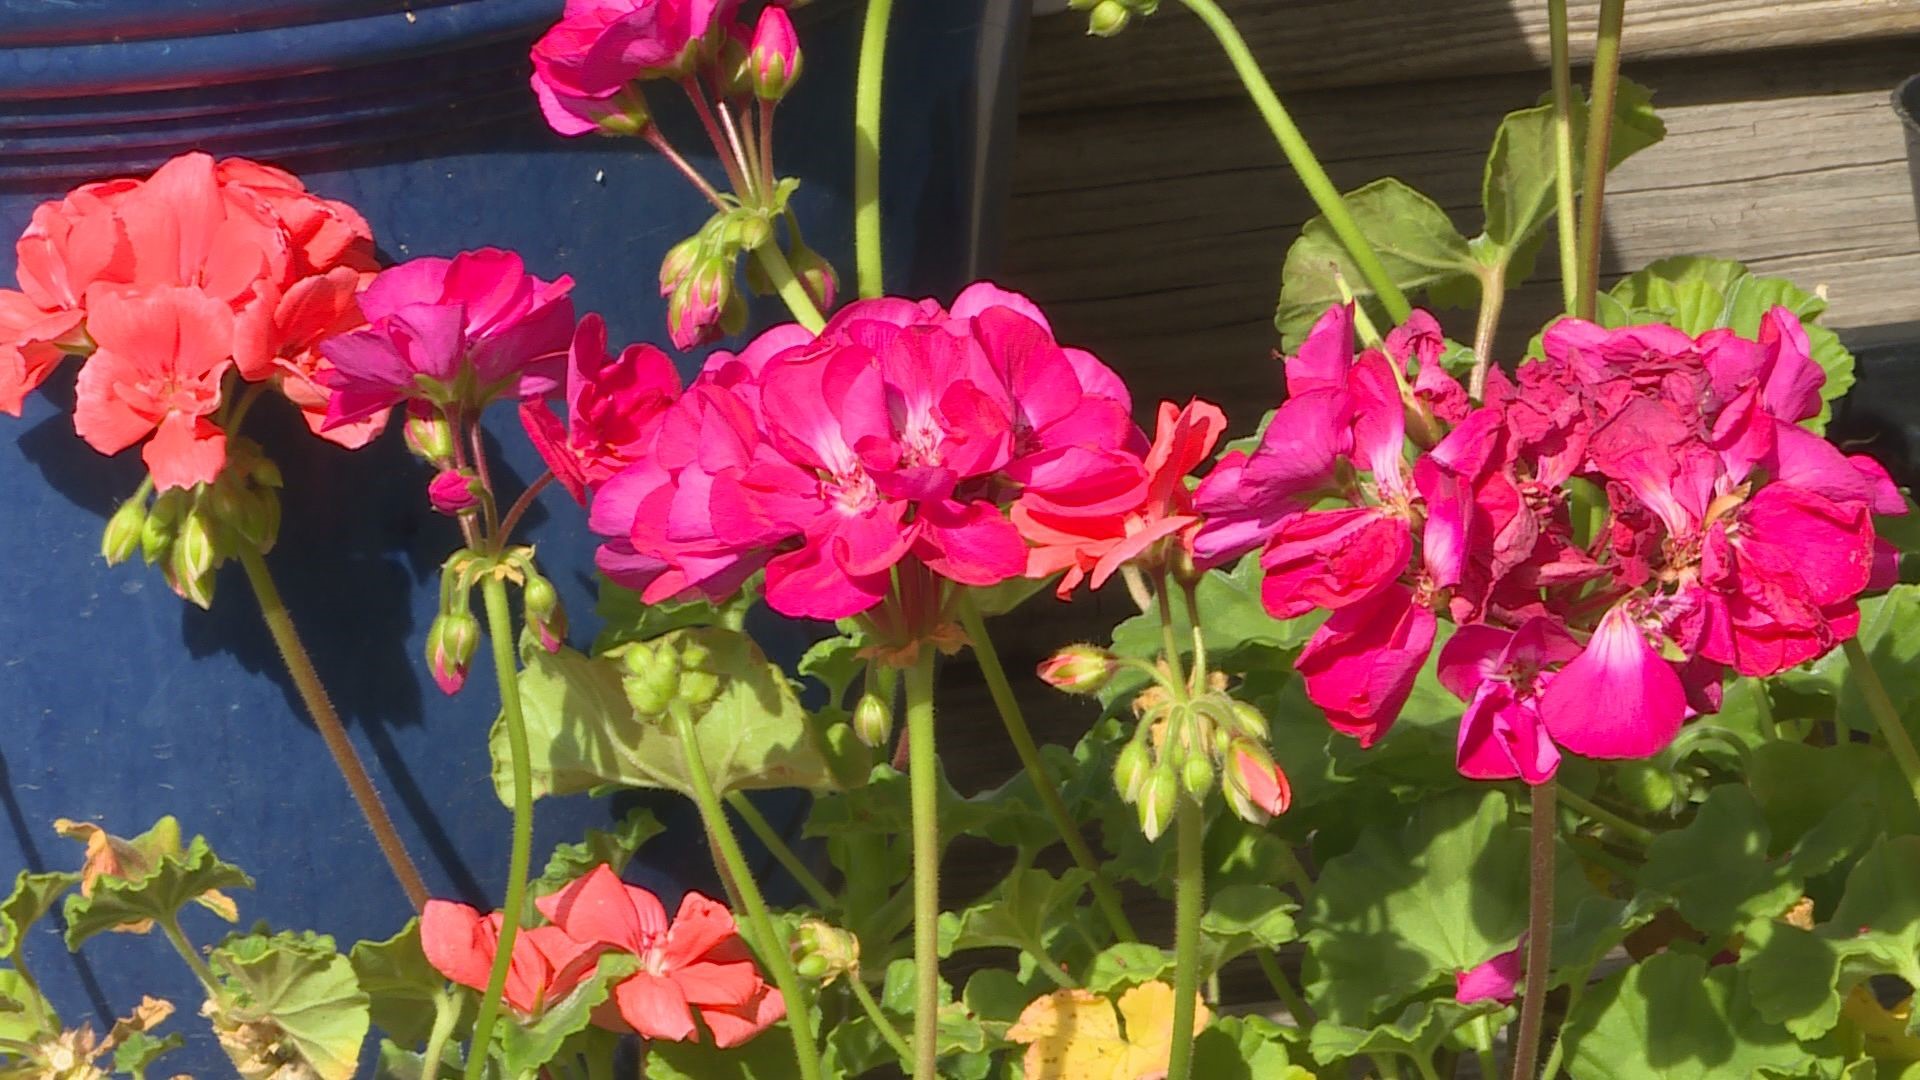 It won't be long before our housebound flowers can go outside. Here are some tips on how to get them ready to enjoy the late spring and summer on your patio.